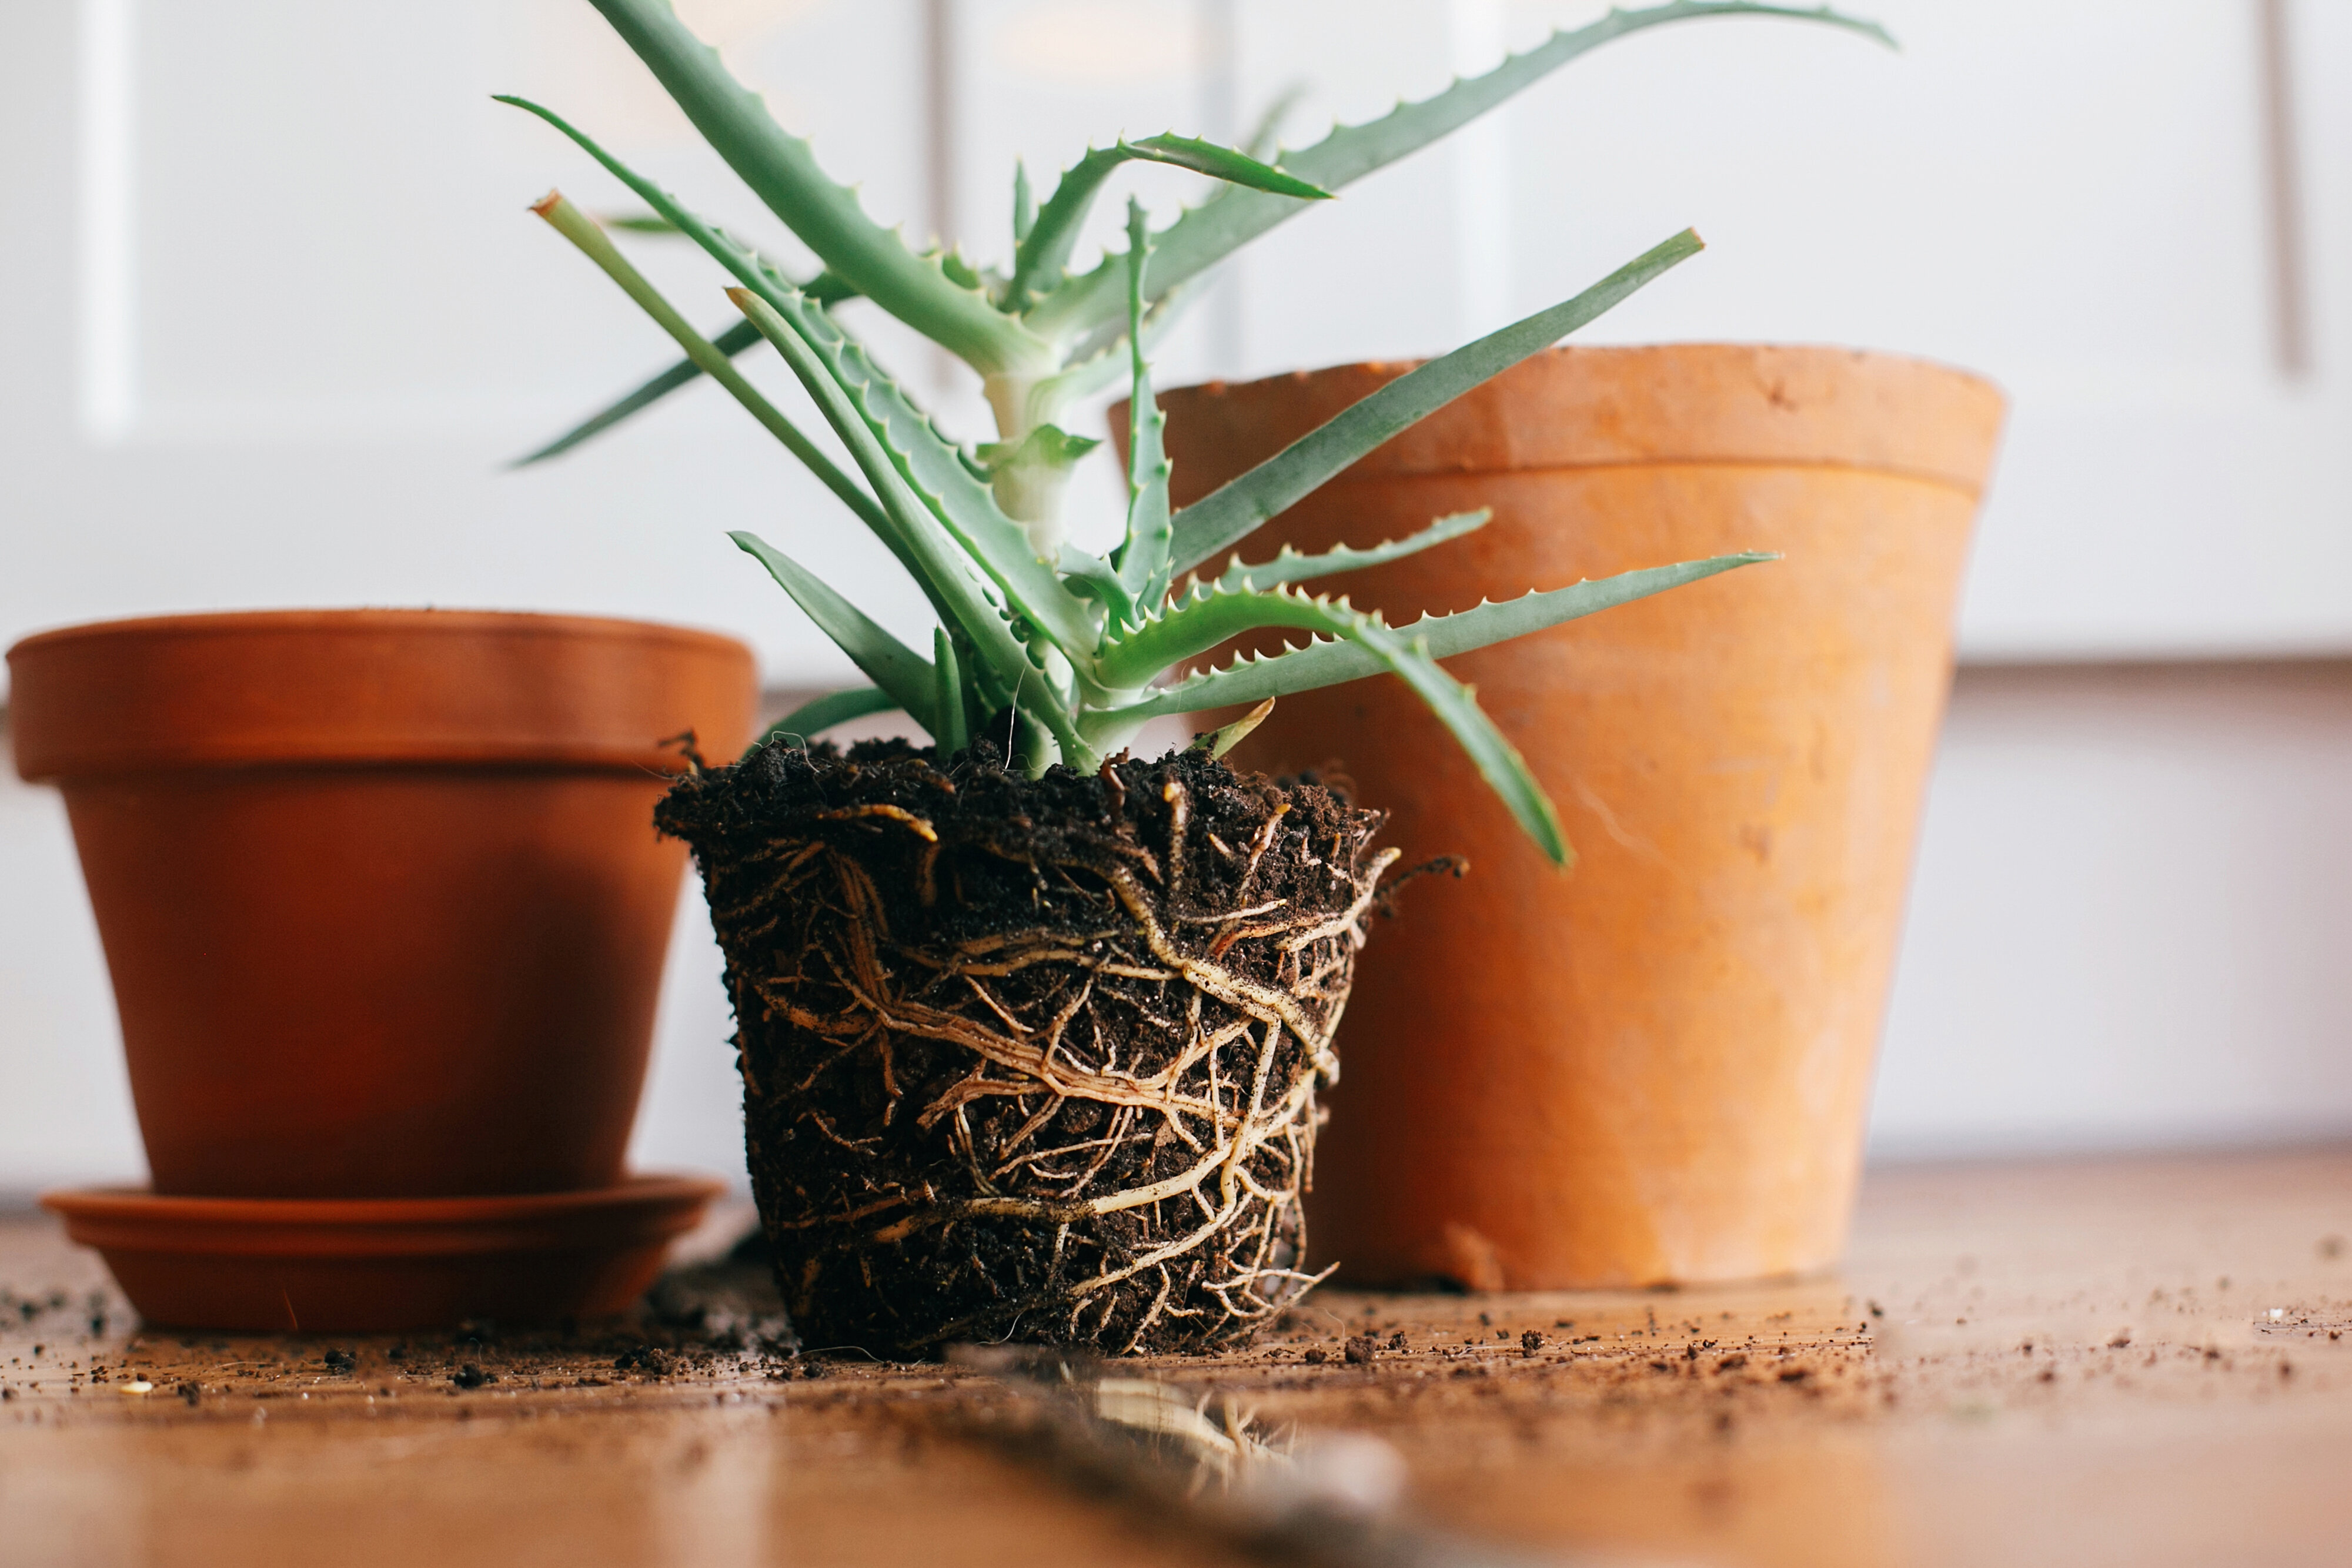 How To Repot A Plant Without Killing It, According To Green Thumbs | HuffPost Life